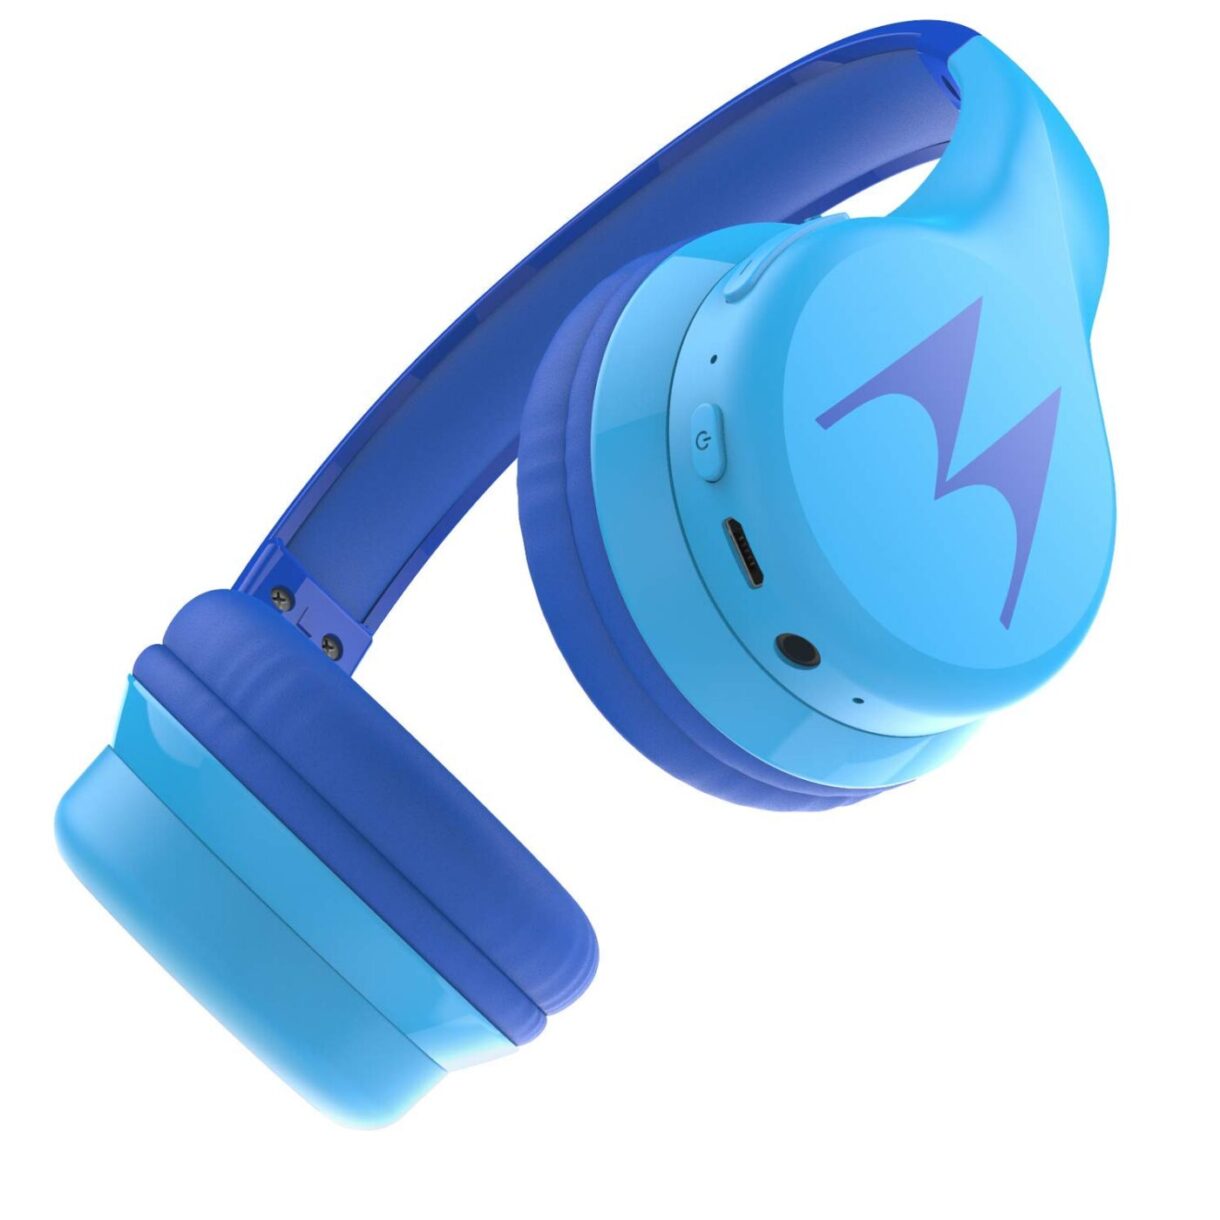 Motorola Squads 300 Wireless Kids Headphones with 24 Hours Play Time, Audio Splitter for Sharing and Anti-Allergic Cushion